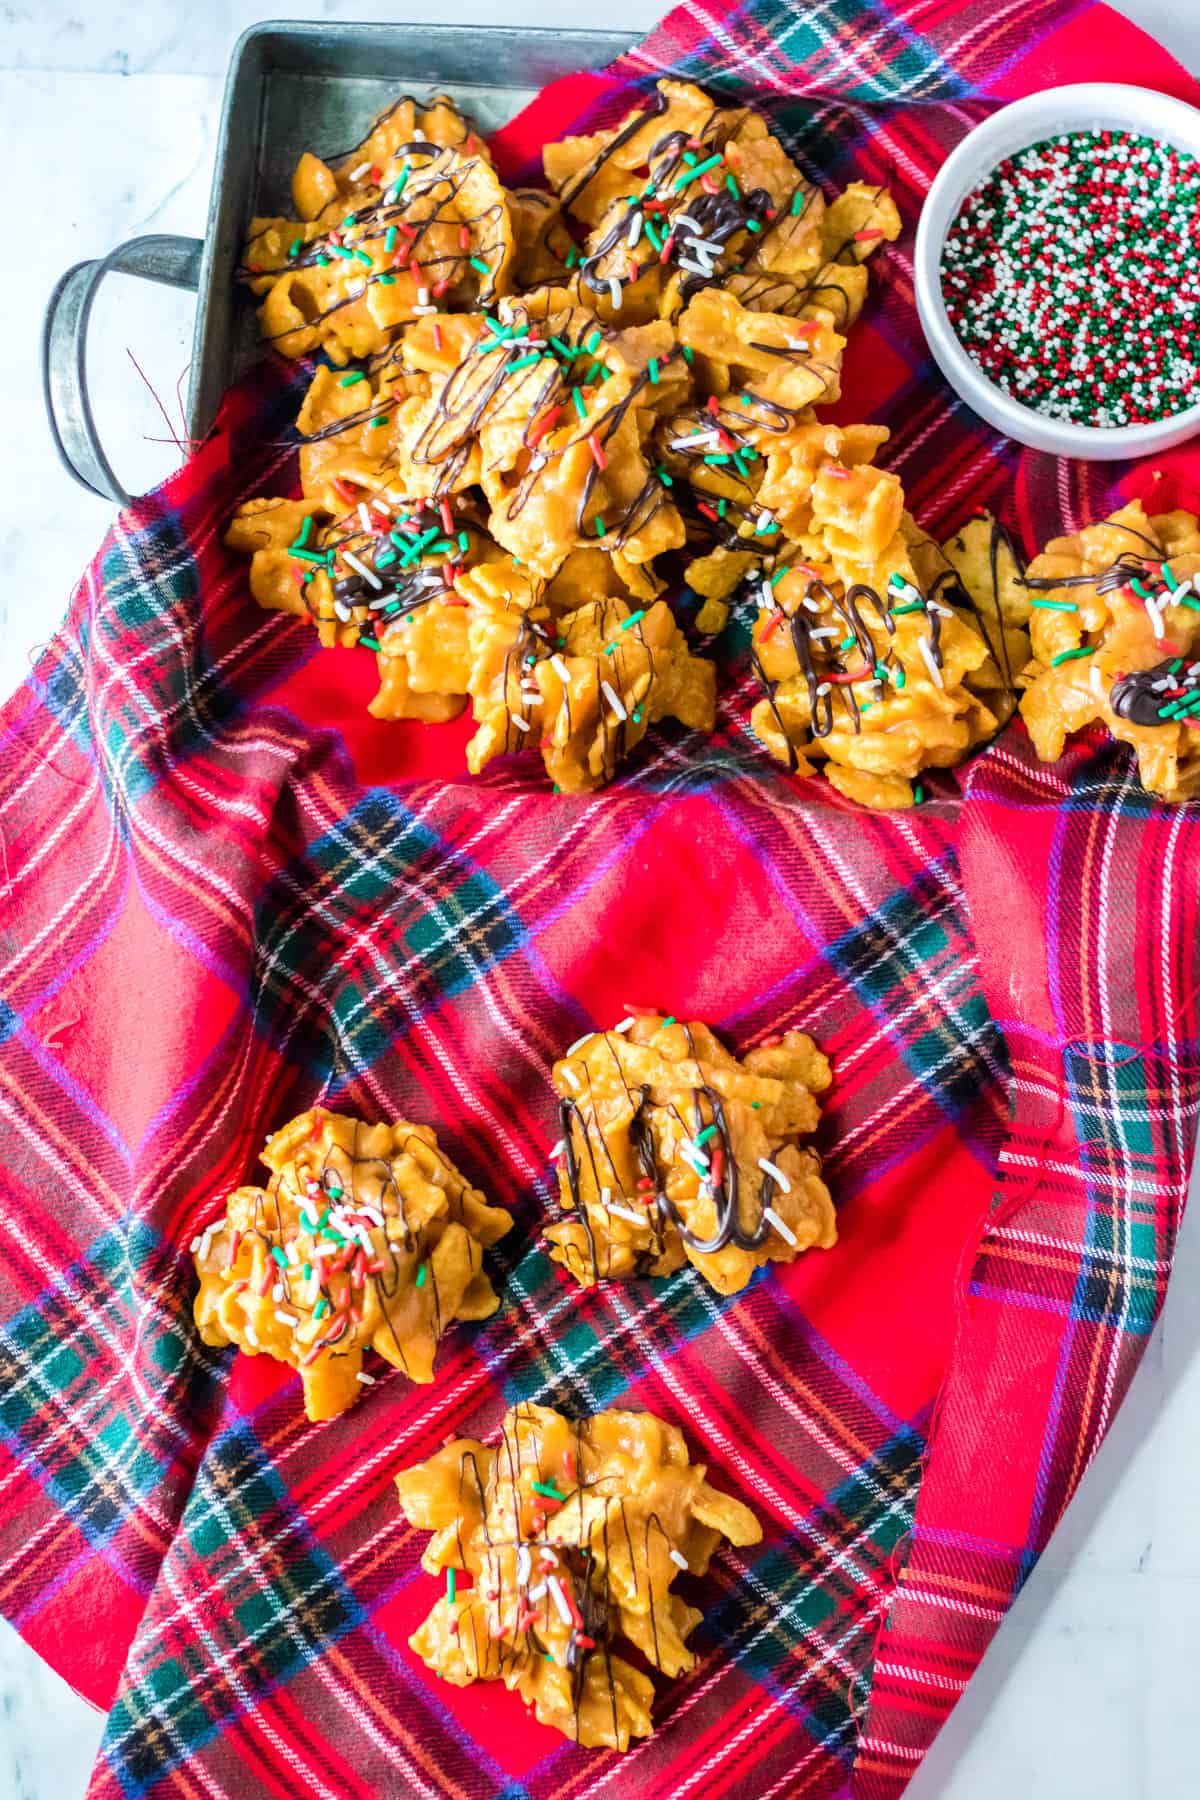 Peanut Butter fritos candies with holiday sprinkles on holiday napkin.